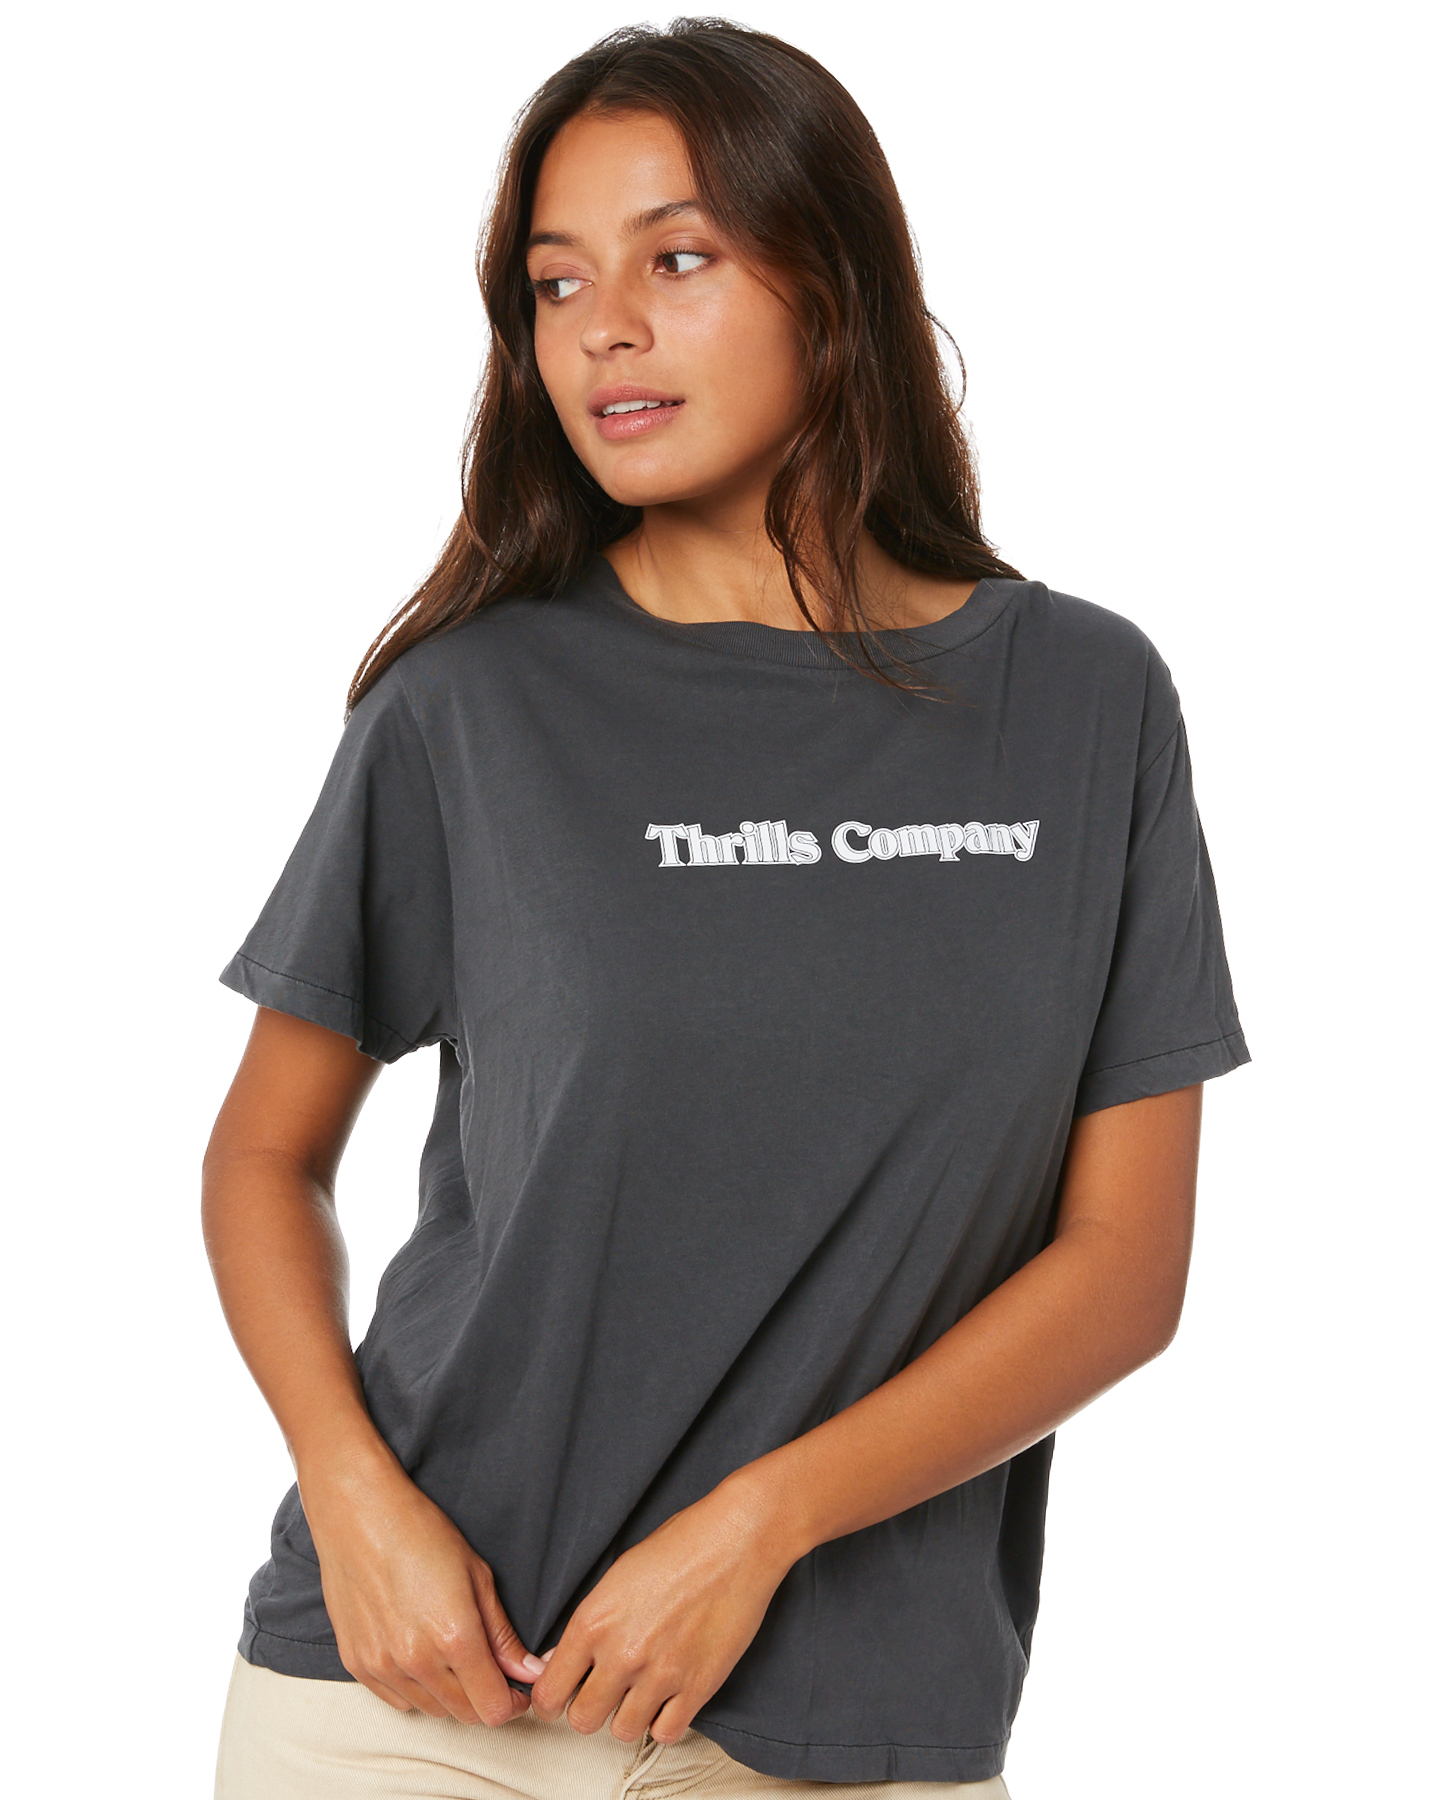 Thrills Company Pinline Relaxed Tee - Merch Black | SurfStitch